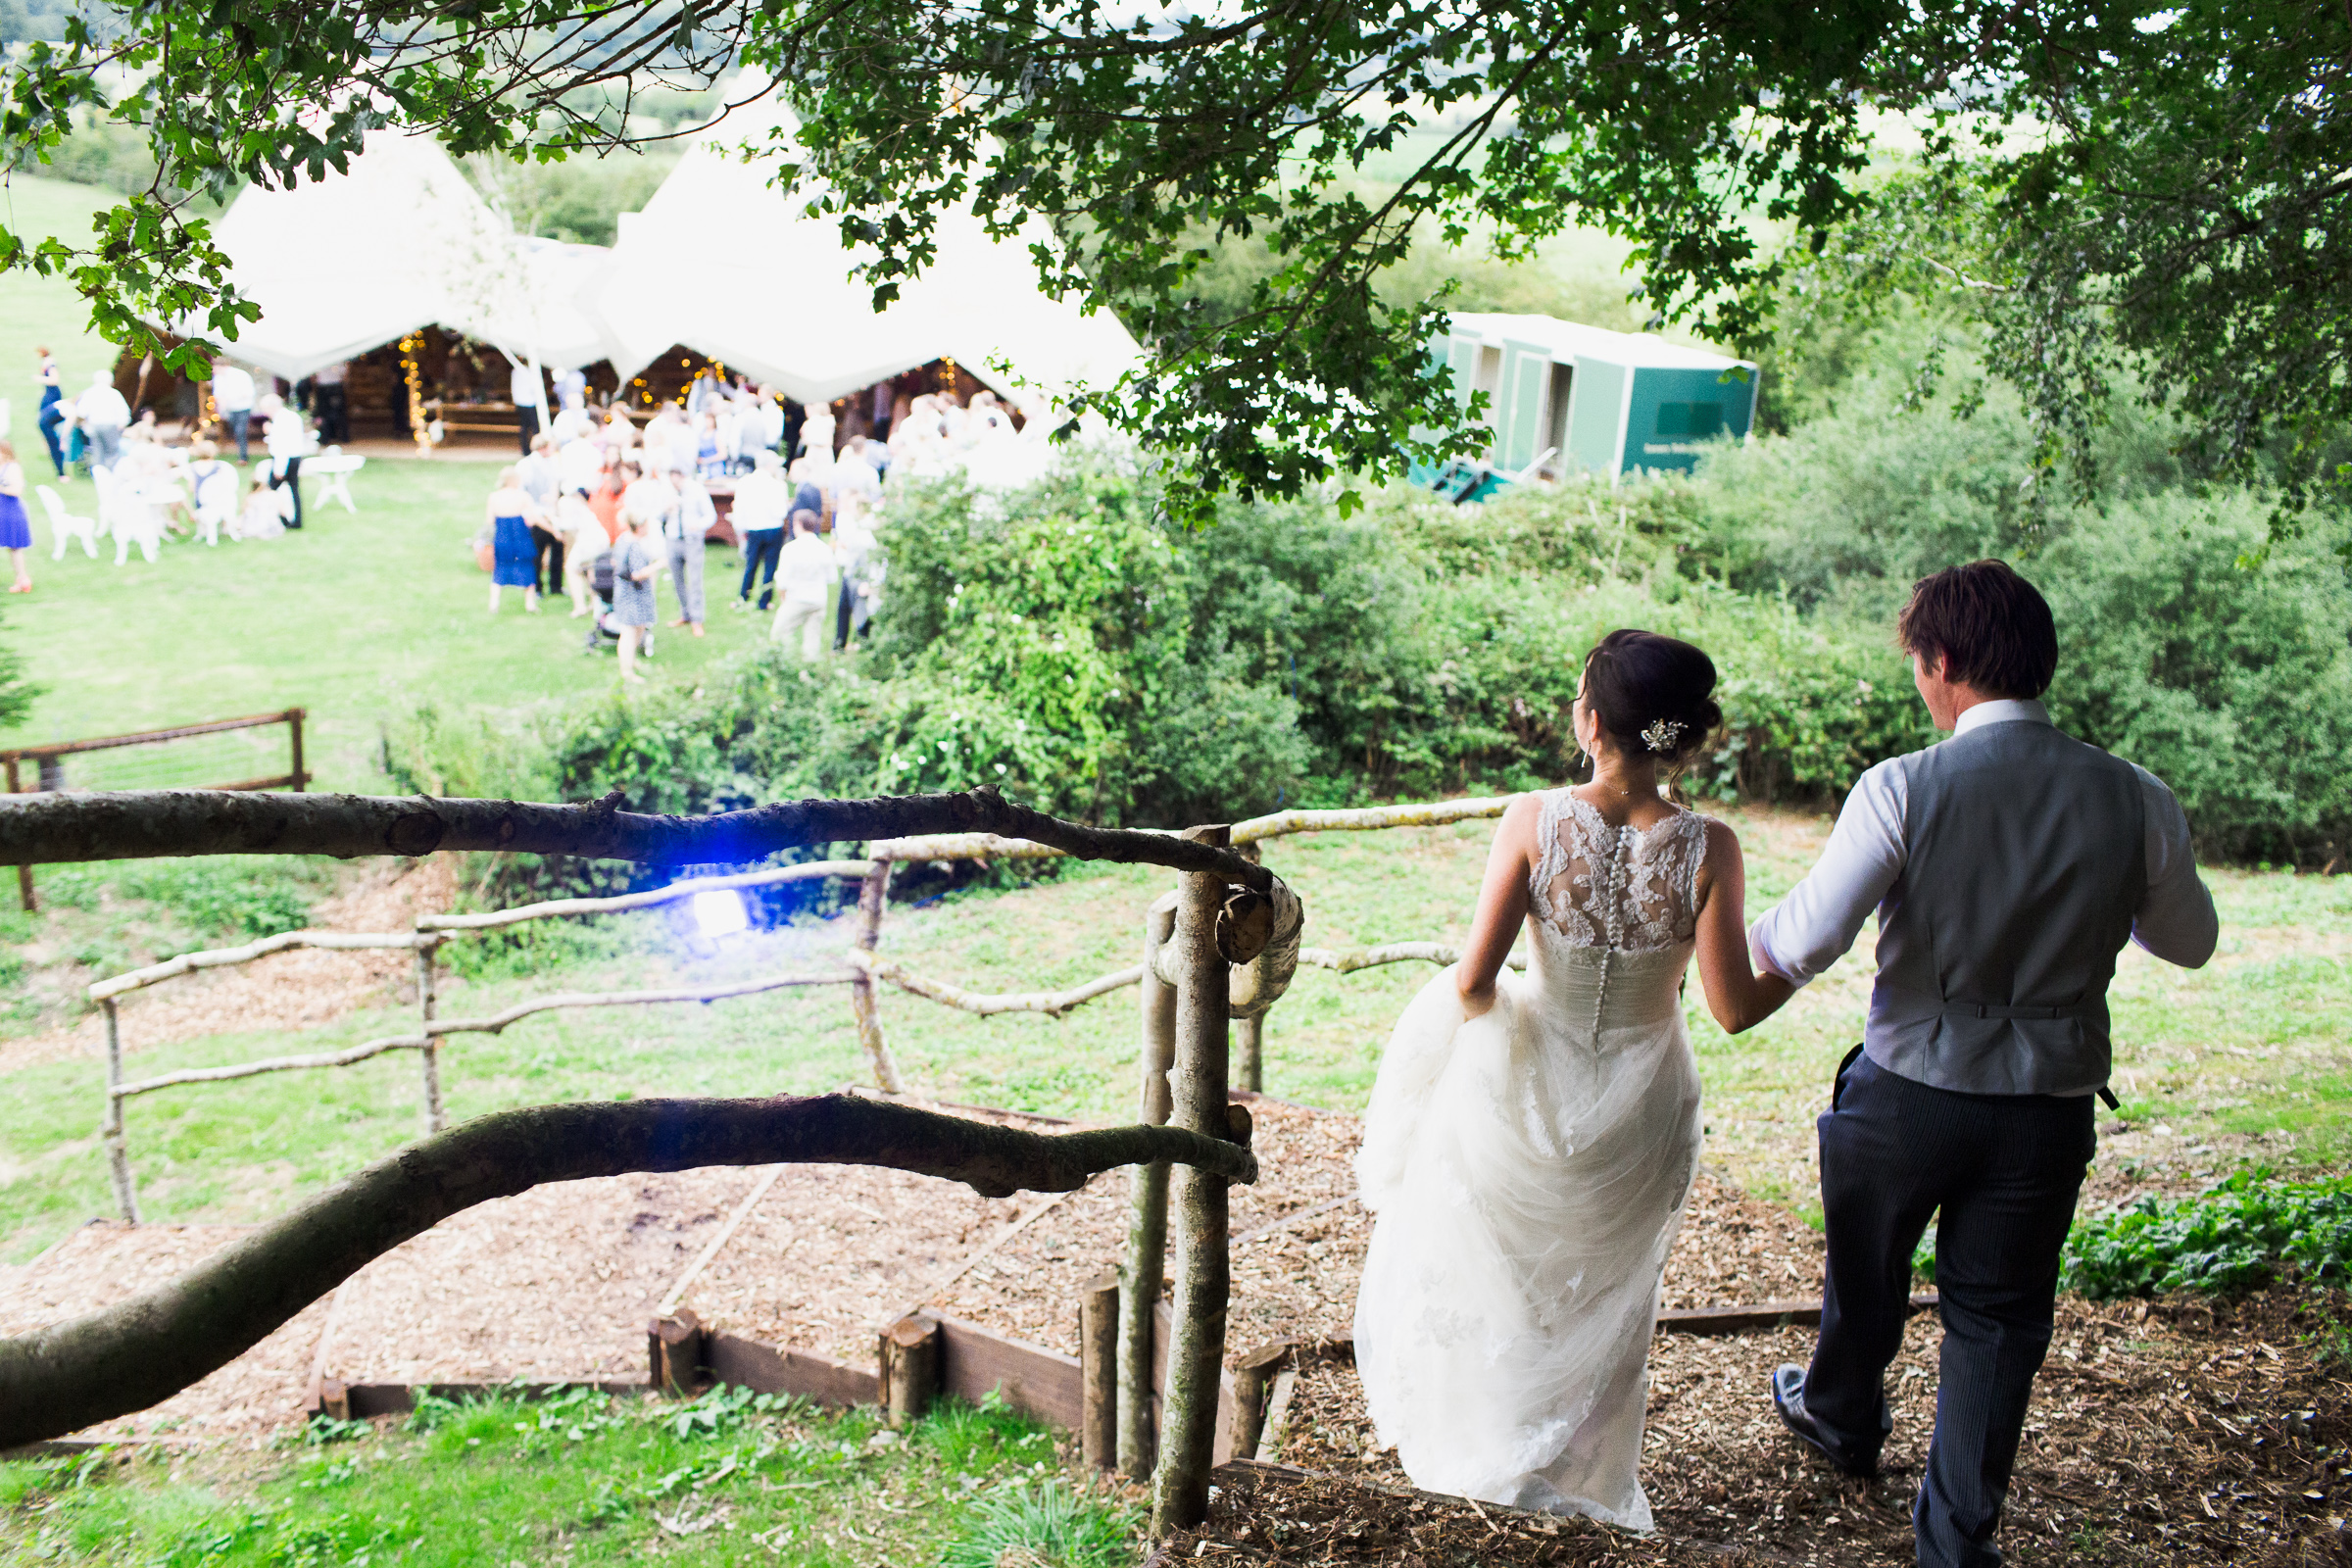 View from behind of bride and groom walking down the wooden steps to their wedding reception in a field. There is a tipi in the field and wedding guests. There are trees above them.